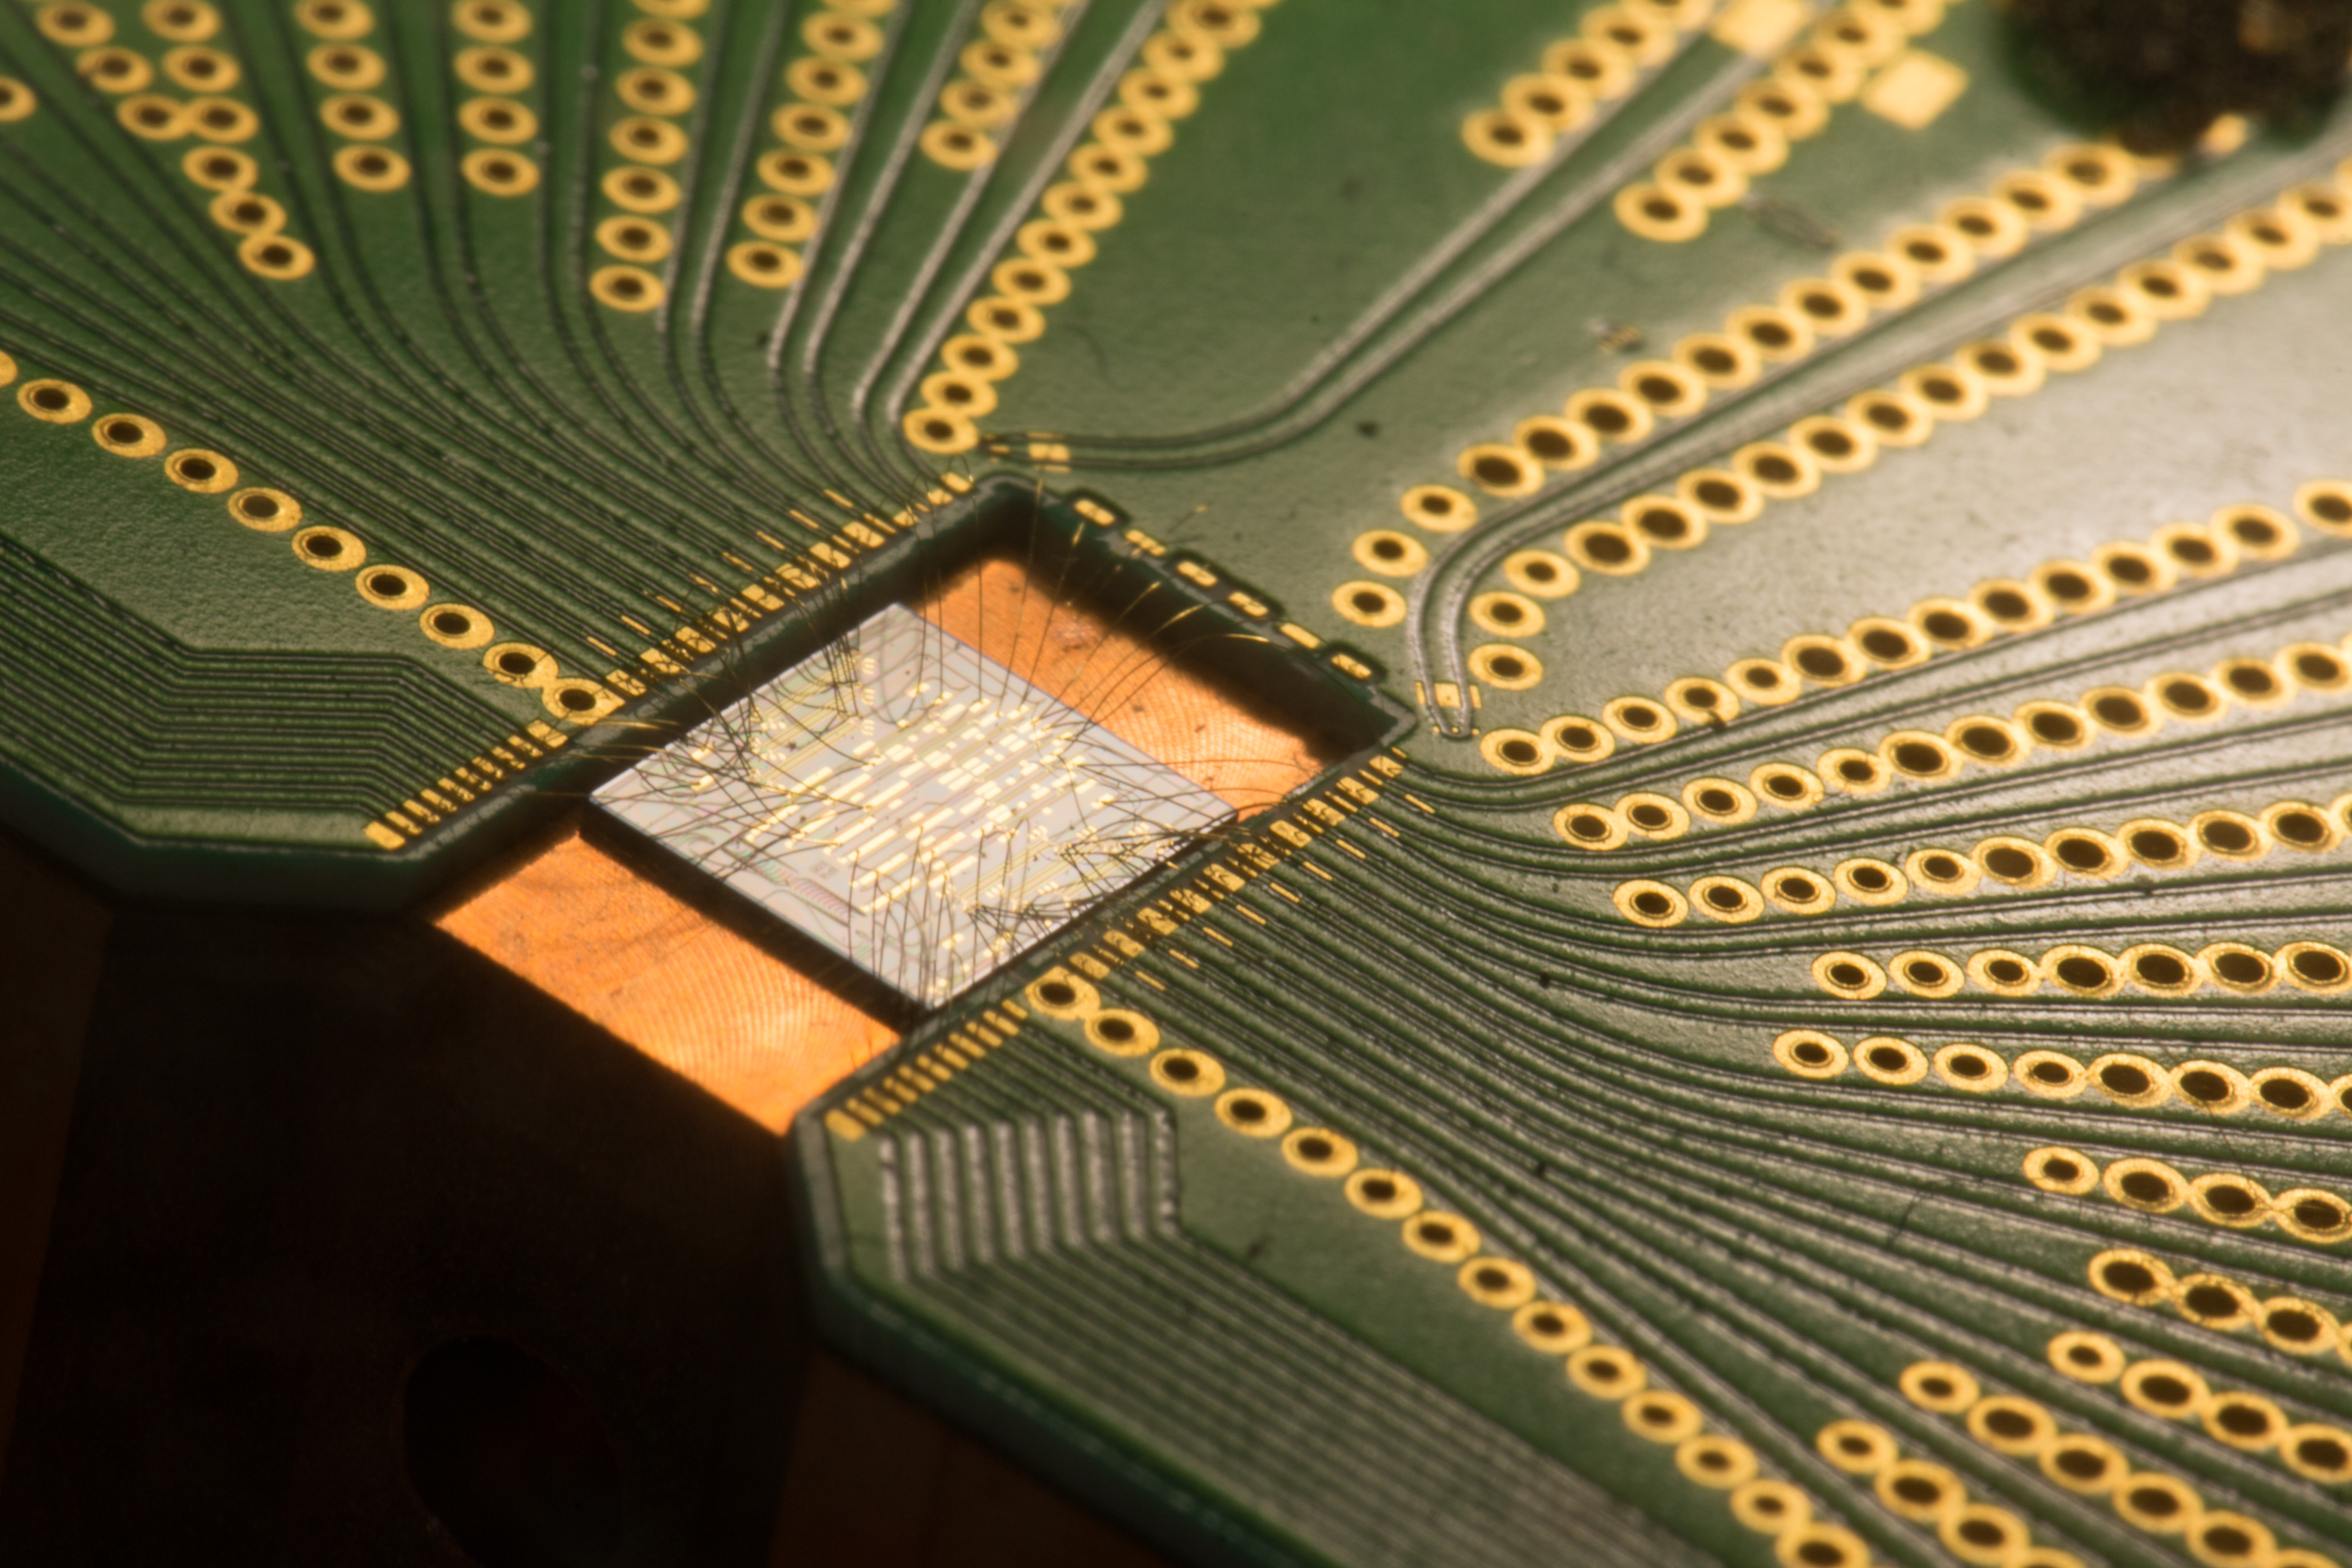 Seamless, low-loss and cost-efficient integration of PICs with electronics will be challenging